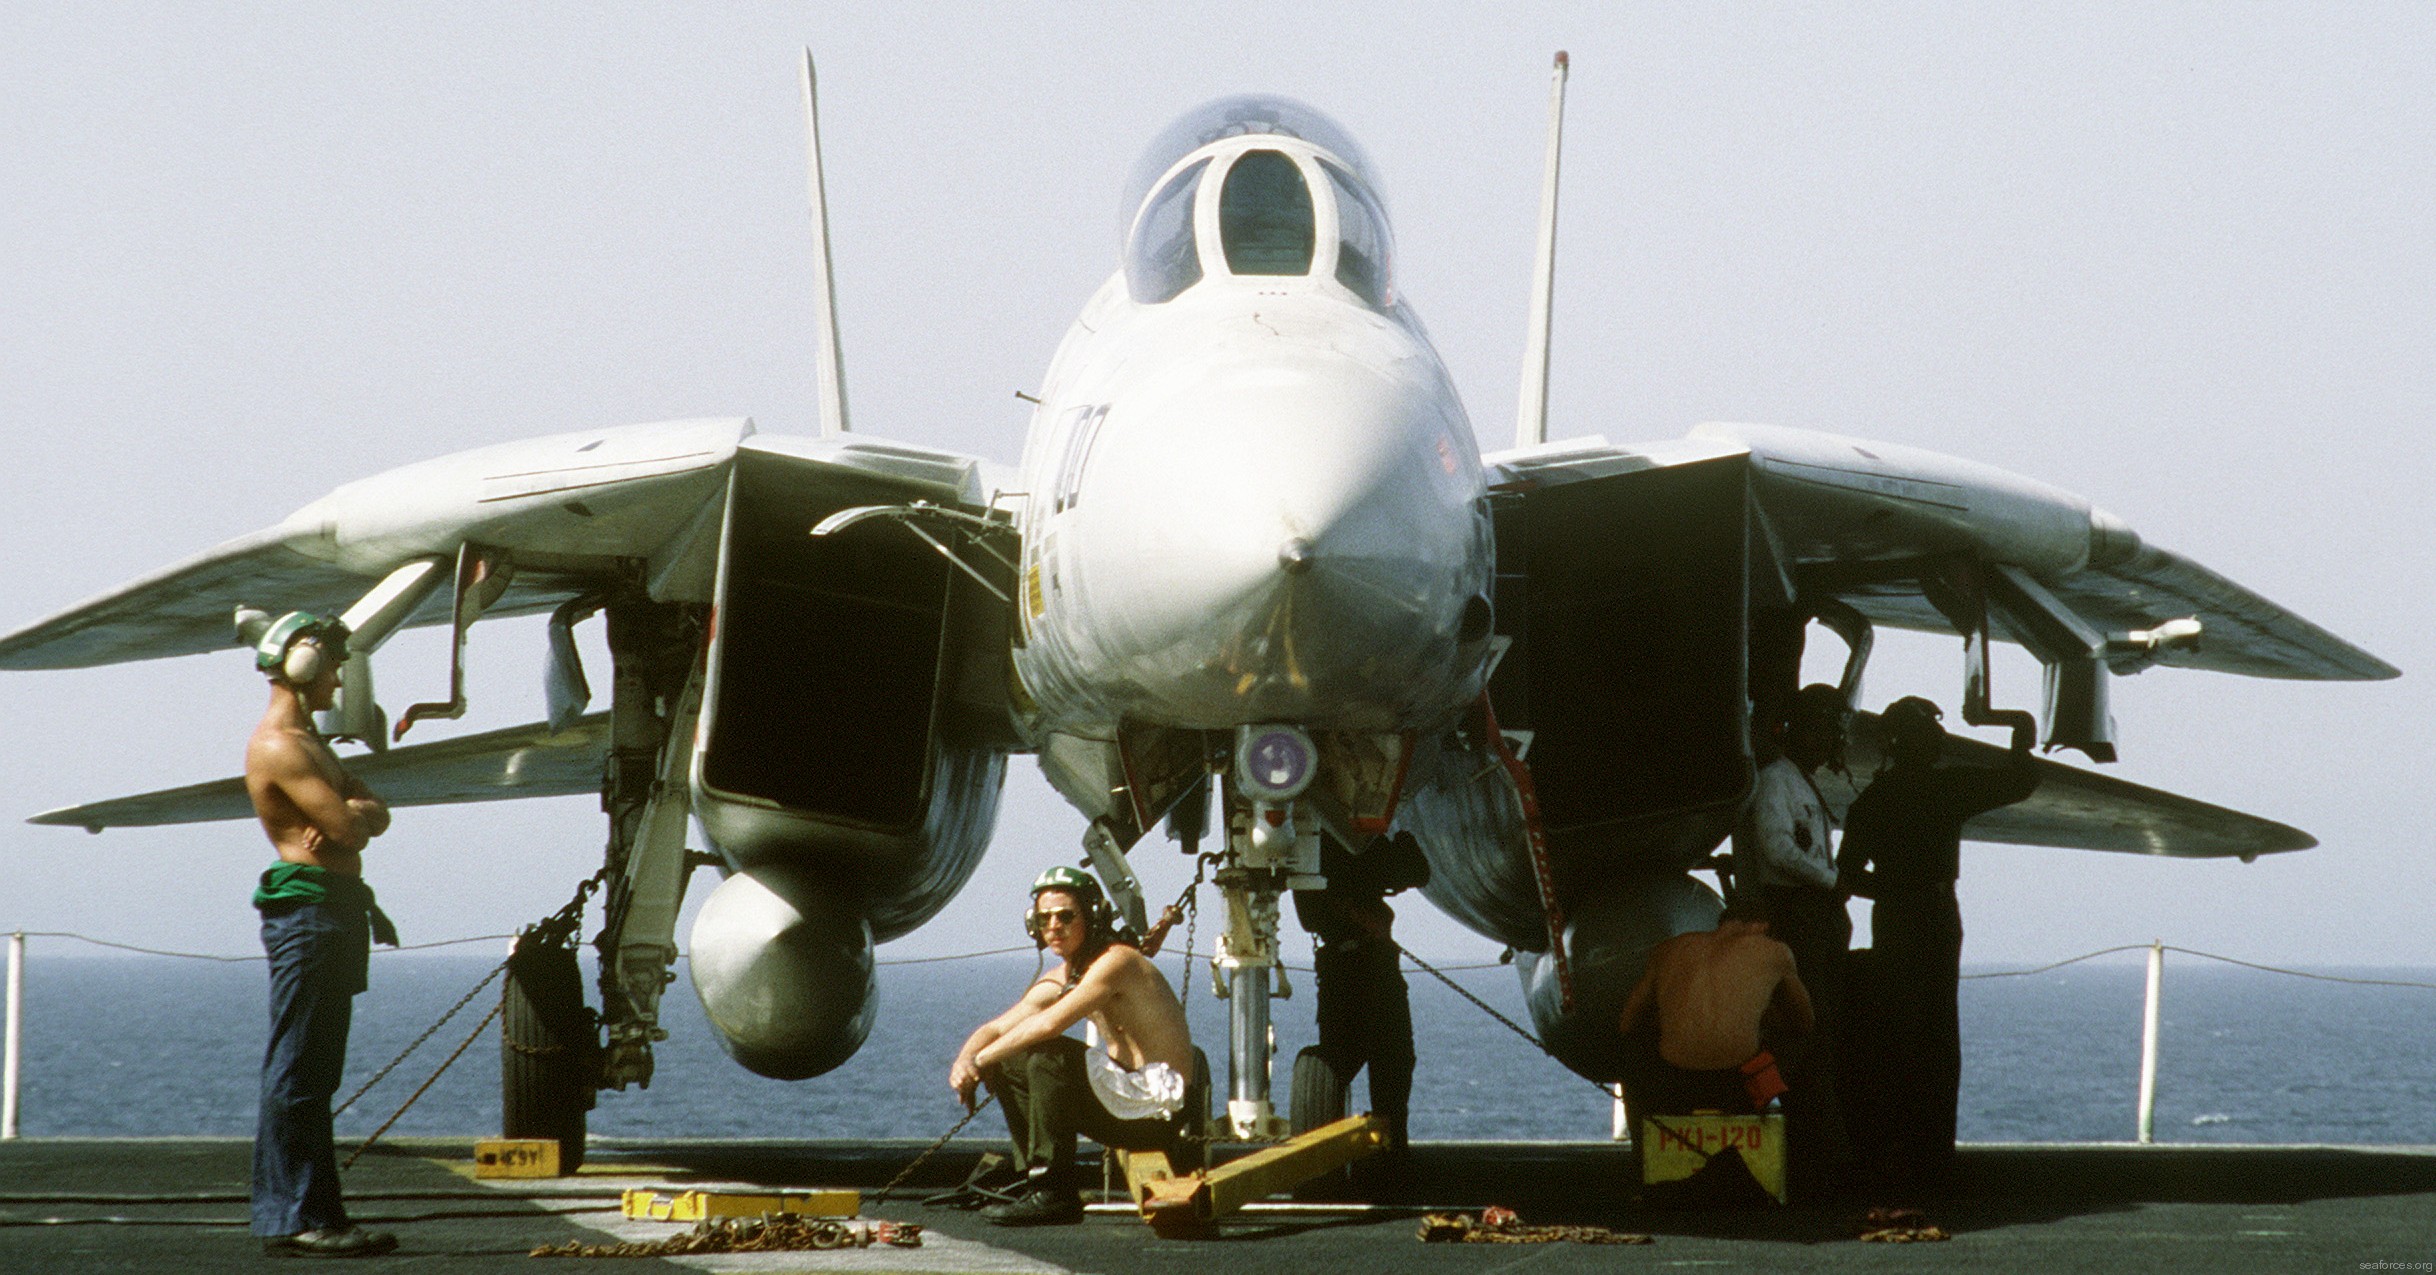 vf-211 fighting checkmates fighter squadron f-14a tomcat us navy carrier air wing cvw-9 uss kitty hawk cv-63 67